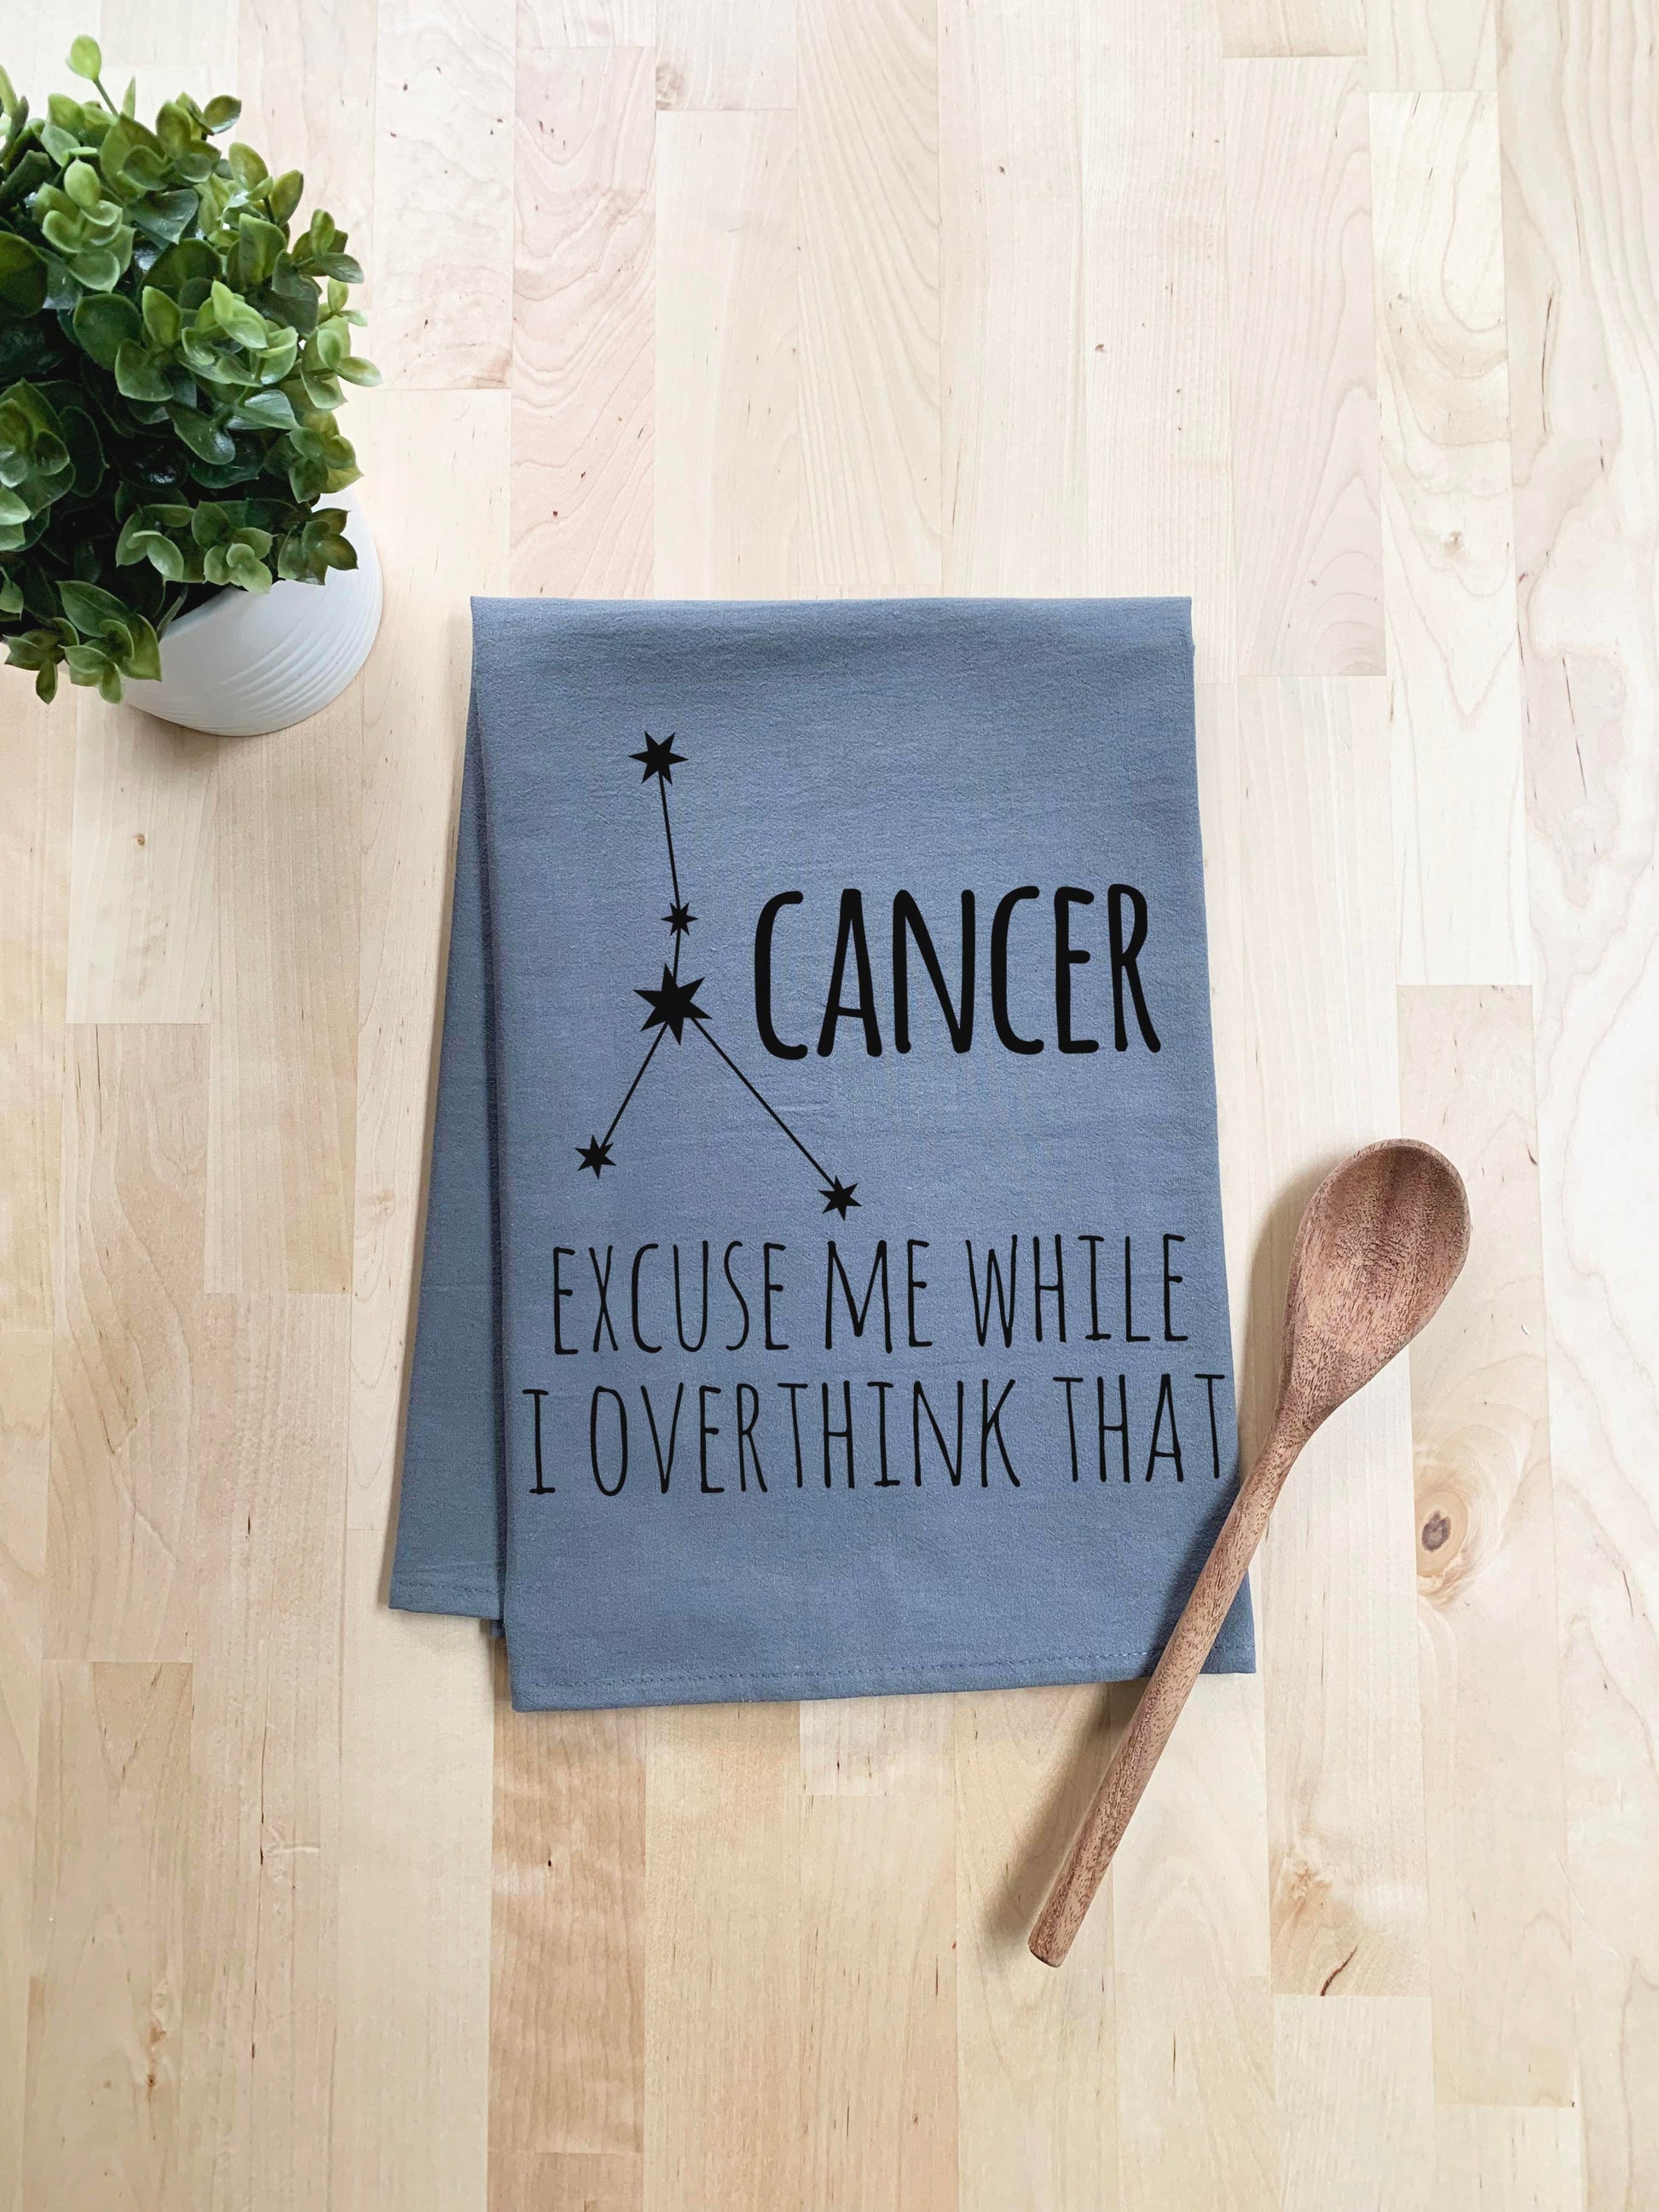 Cancer Zodiac (Excuse Me While I Overthink That) Dish Towel - White Or Gray - MoonlightMakers